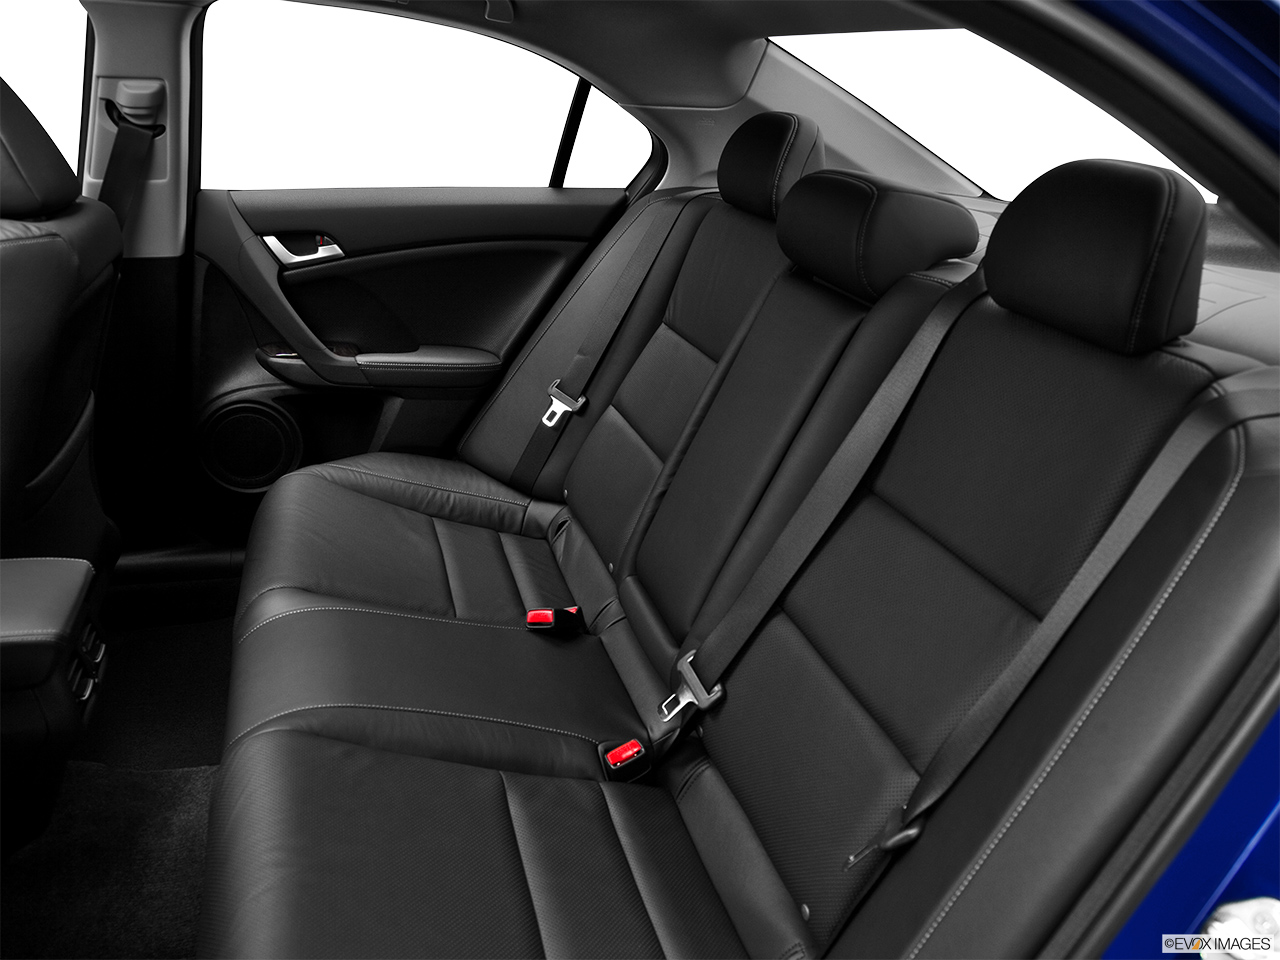 2012 Acura TSX TSX 5-speed Automatic Rear seats from Drivers Side. 